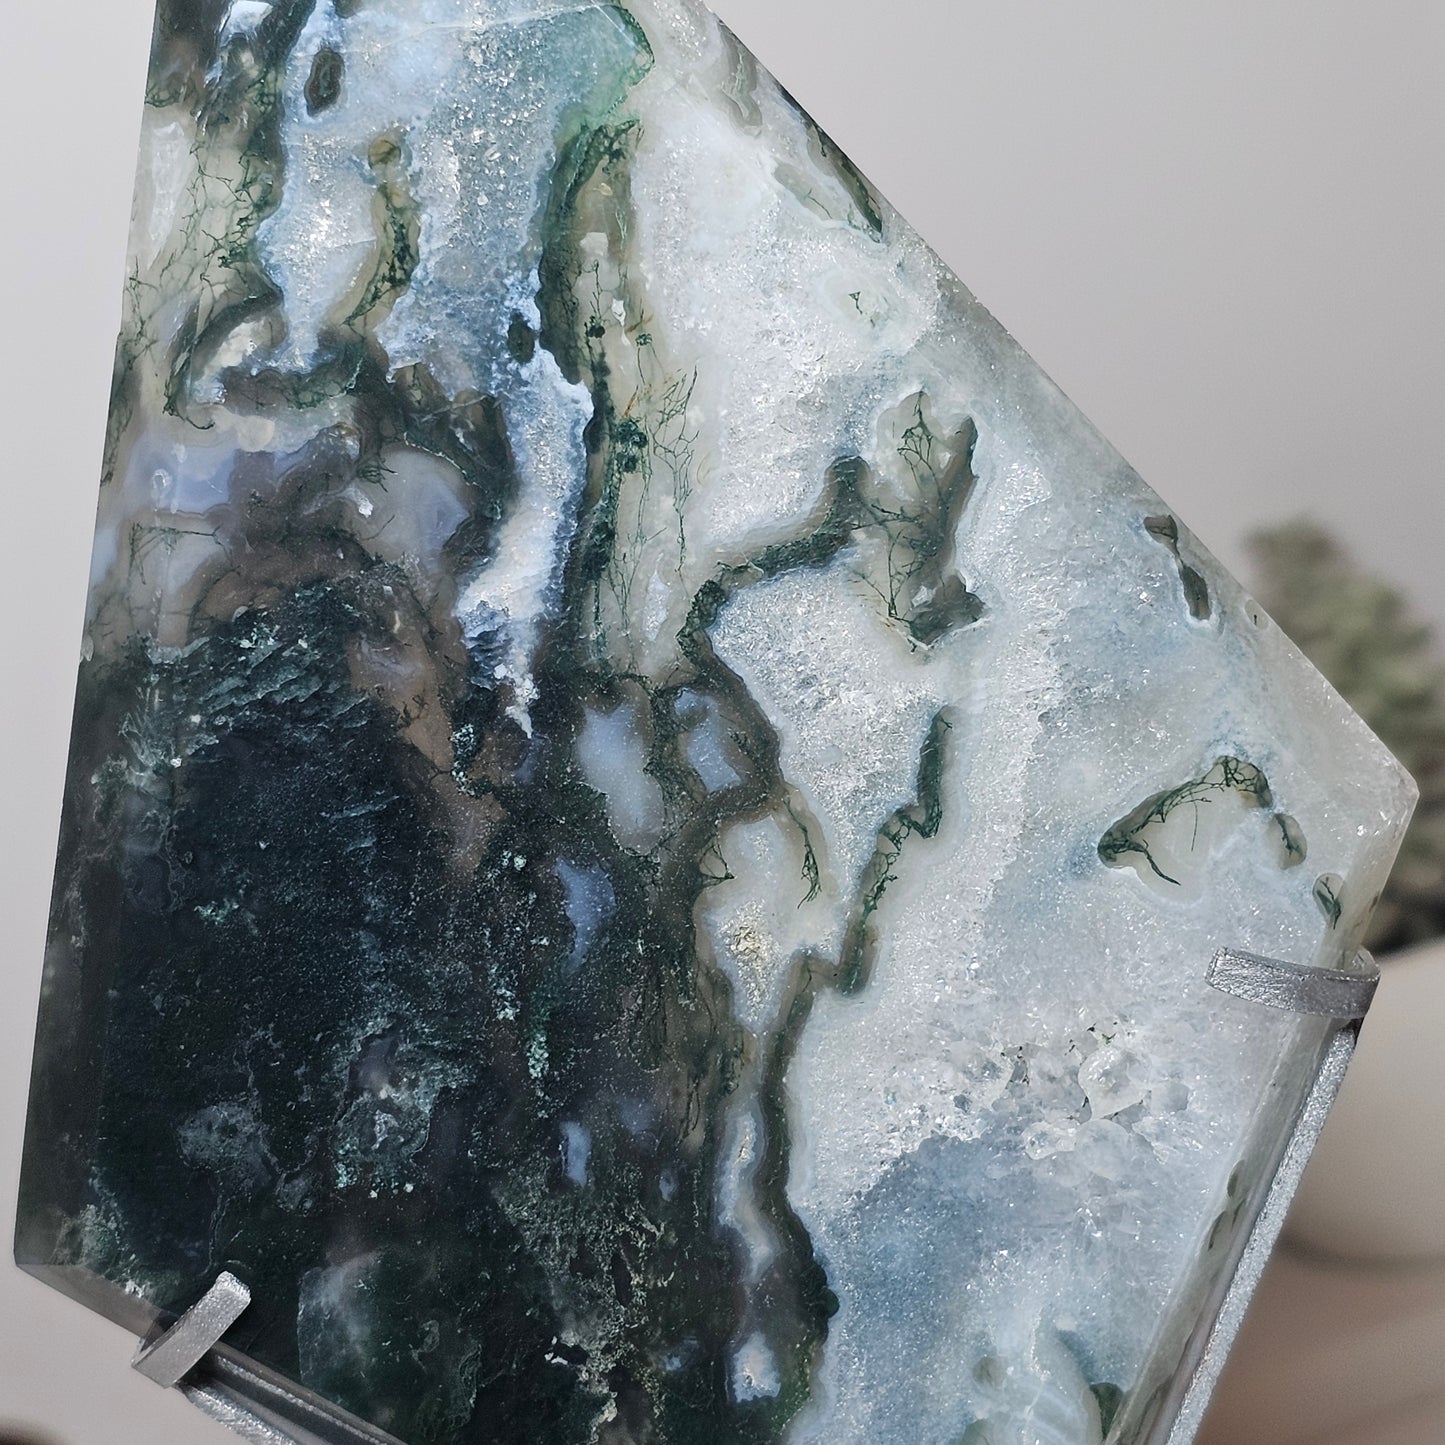 24.5cm beautiful display piece, this diamond shaped Moss Agate carving comes with its own custom matte silver stand.